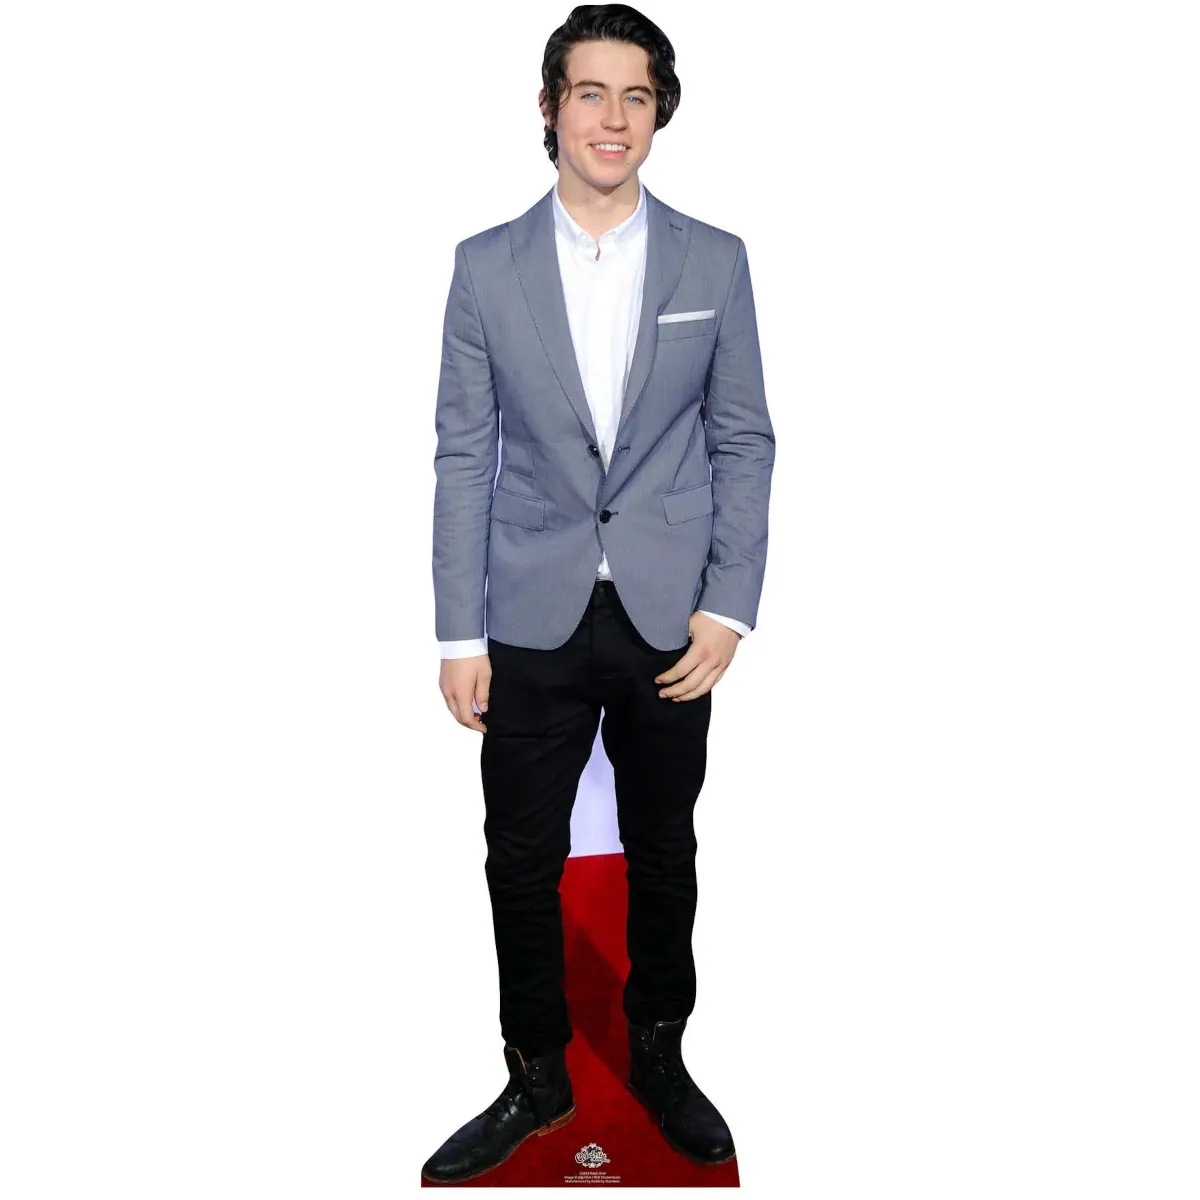 CS633 Nash Grier 'Red Carpet' (Internet Personality) Lifesize Cardboard Cutout Standee Front